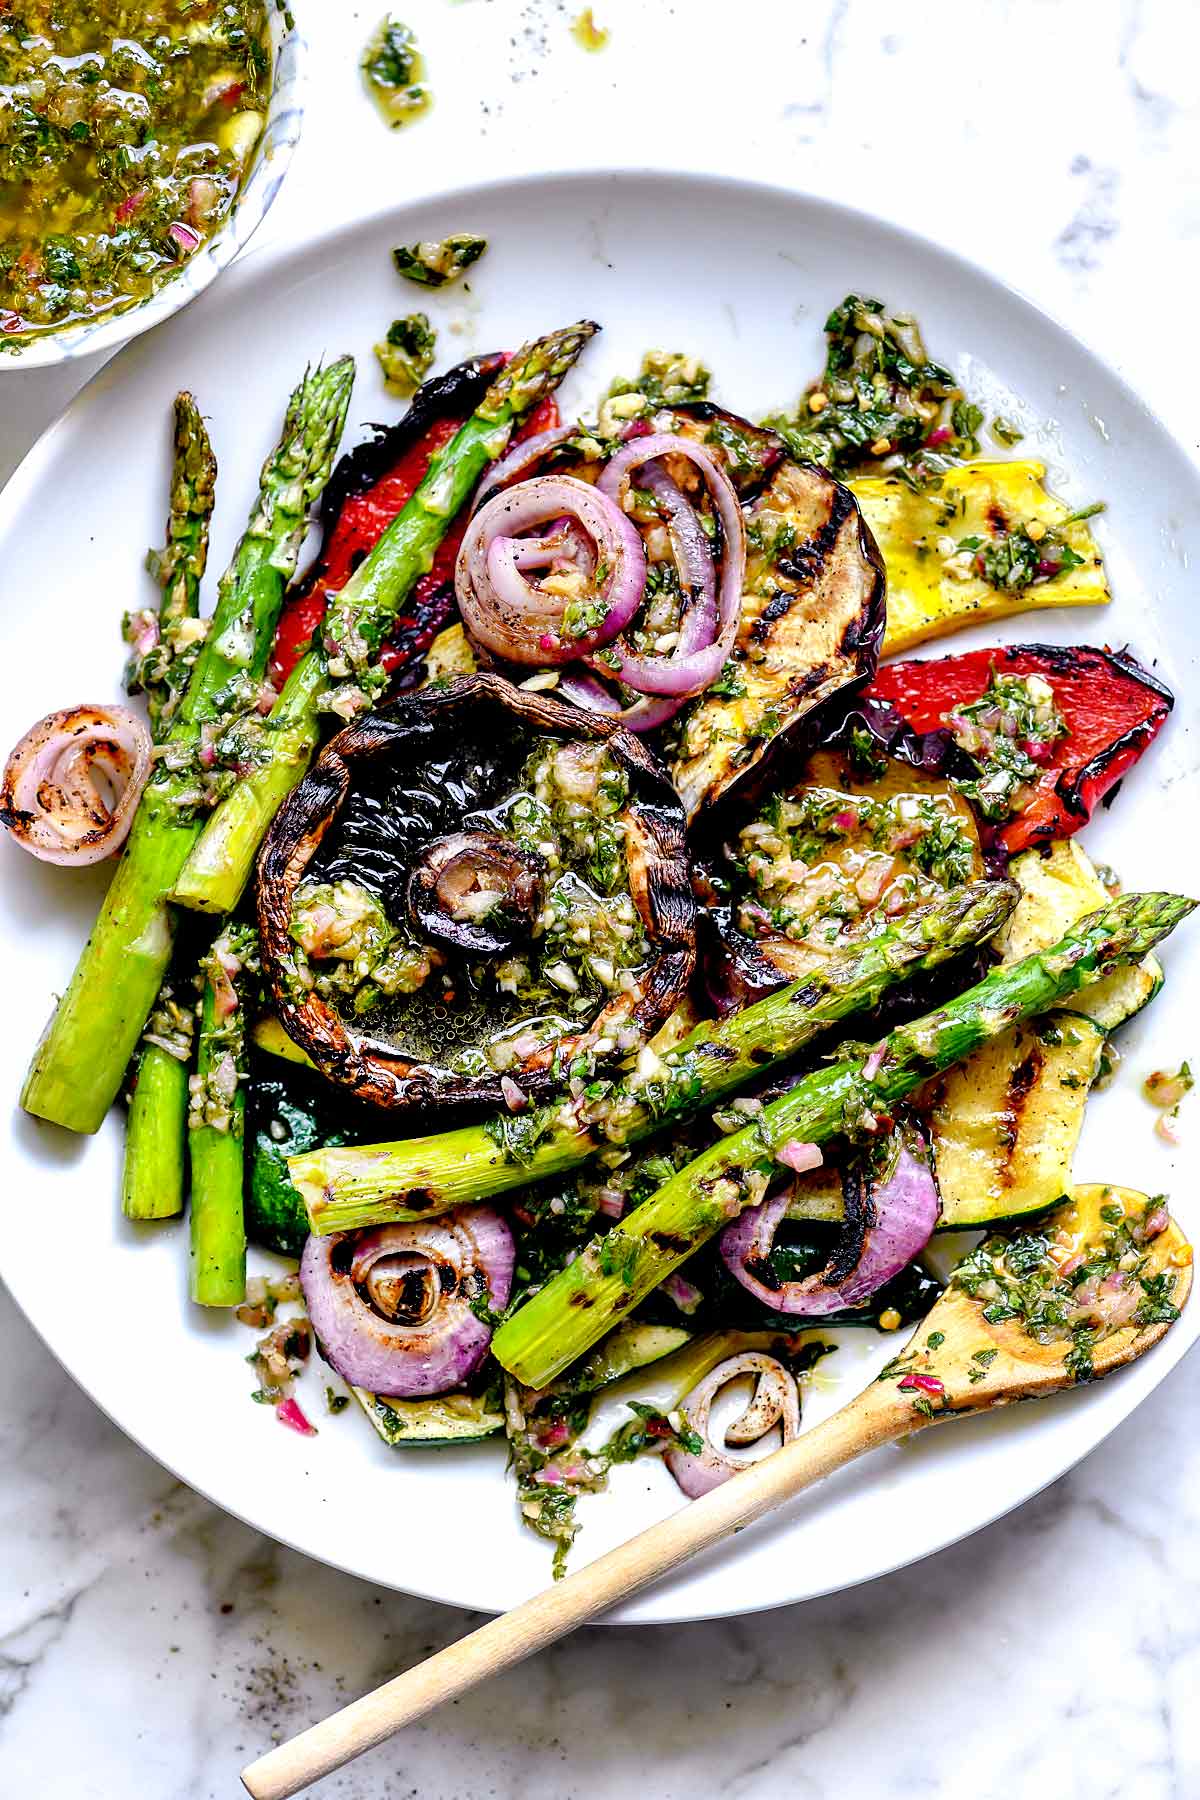 Grilled Vegetables with Chimichurri Sauce | foodiecrush .com